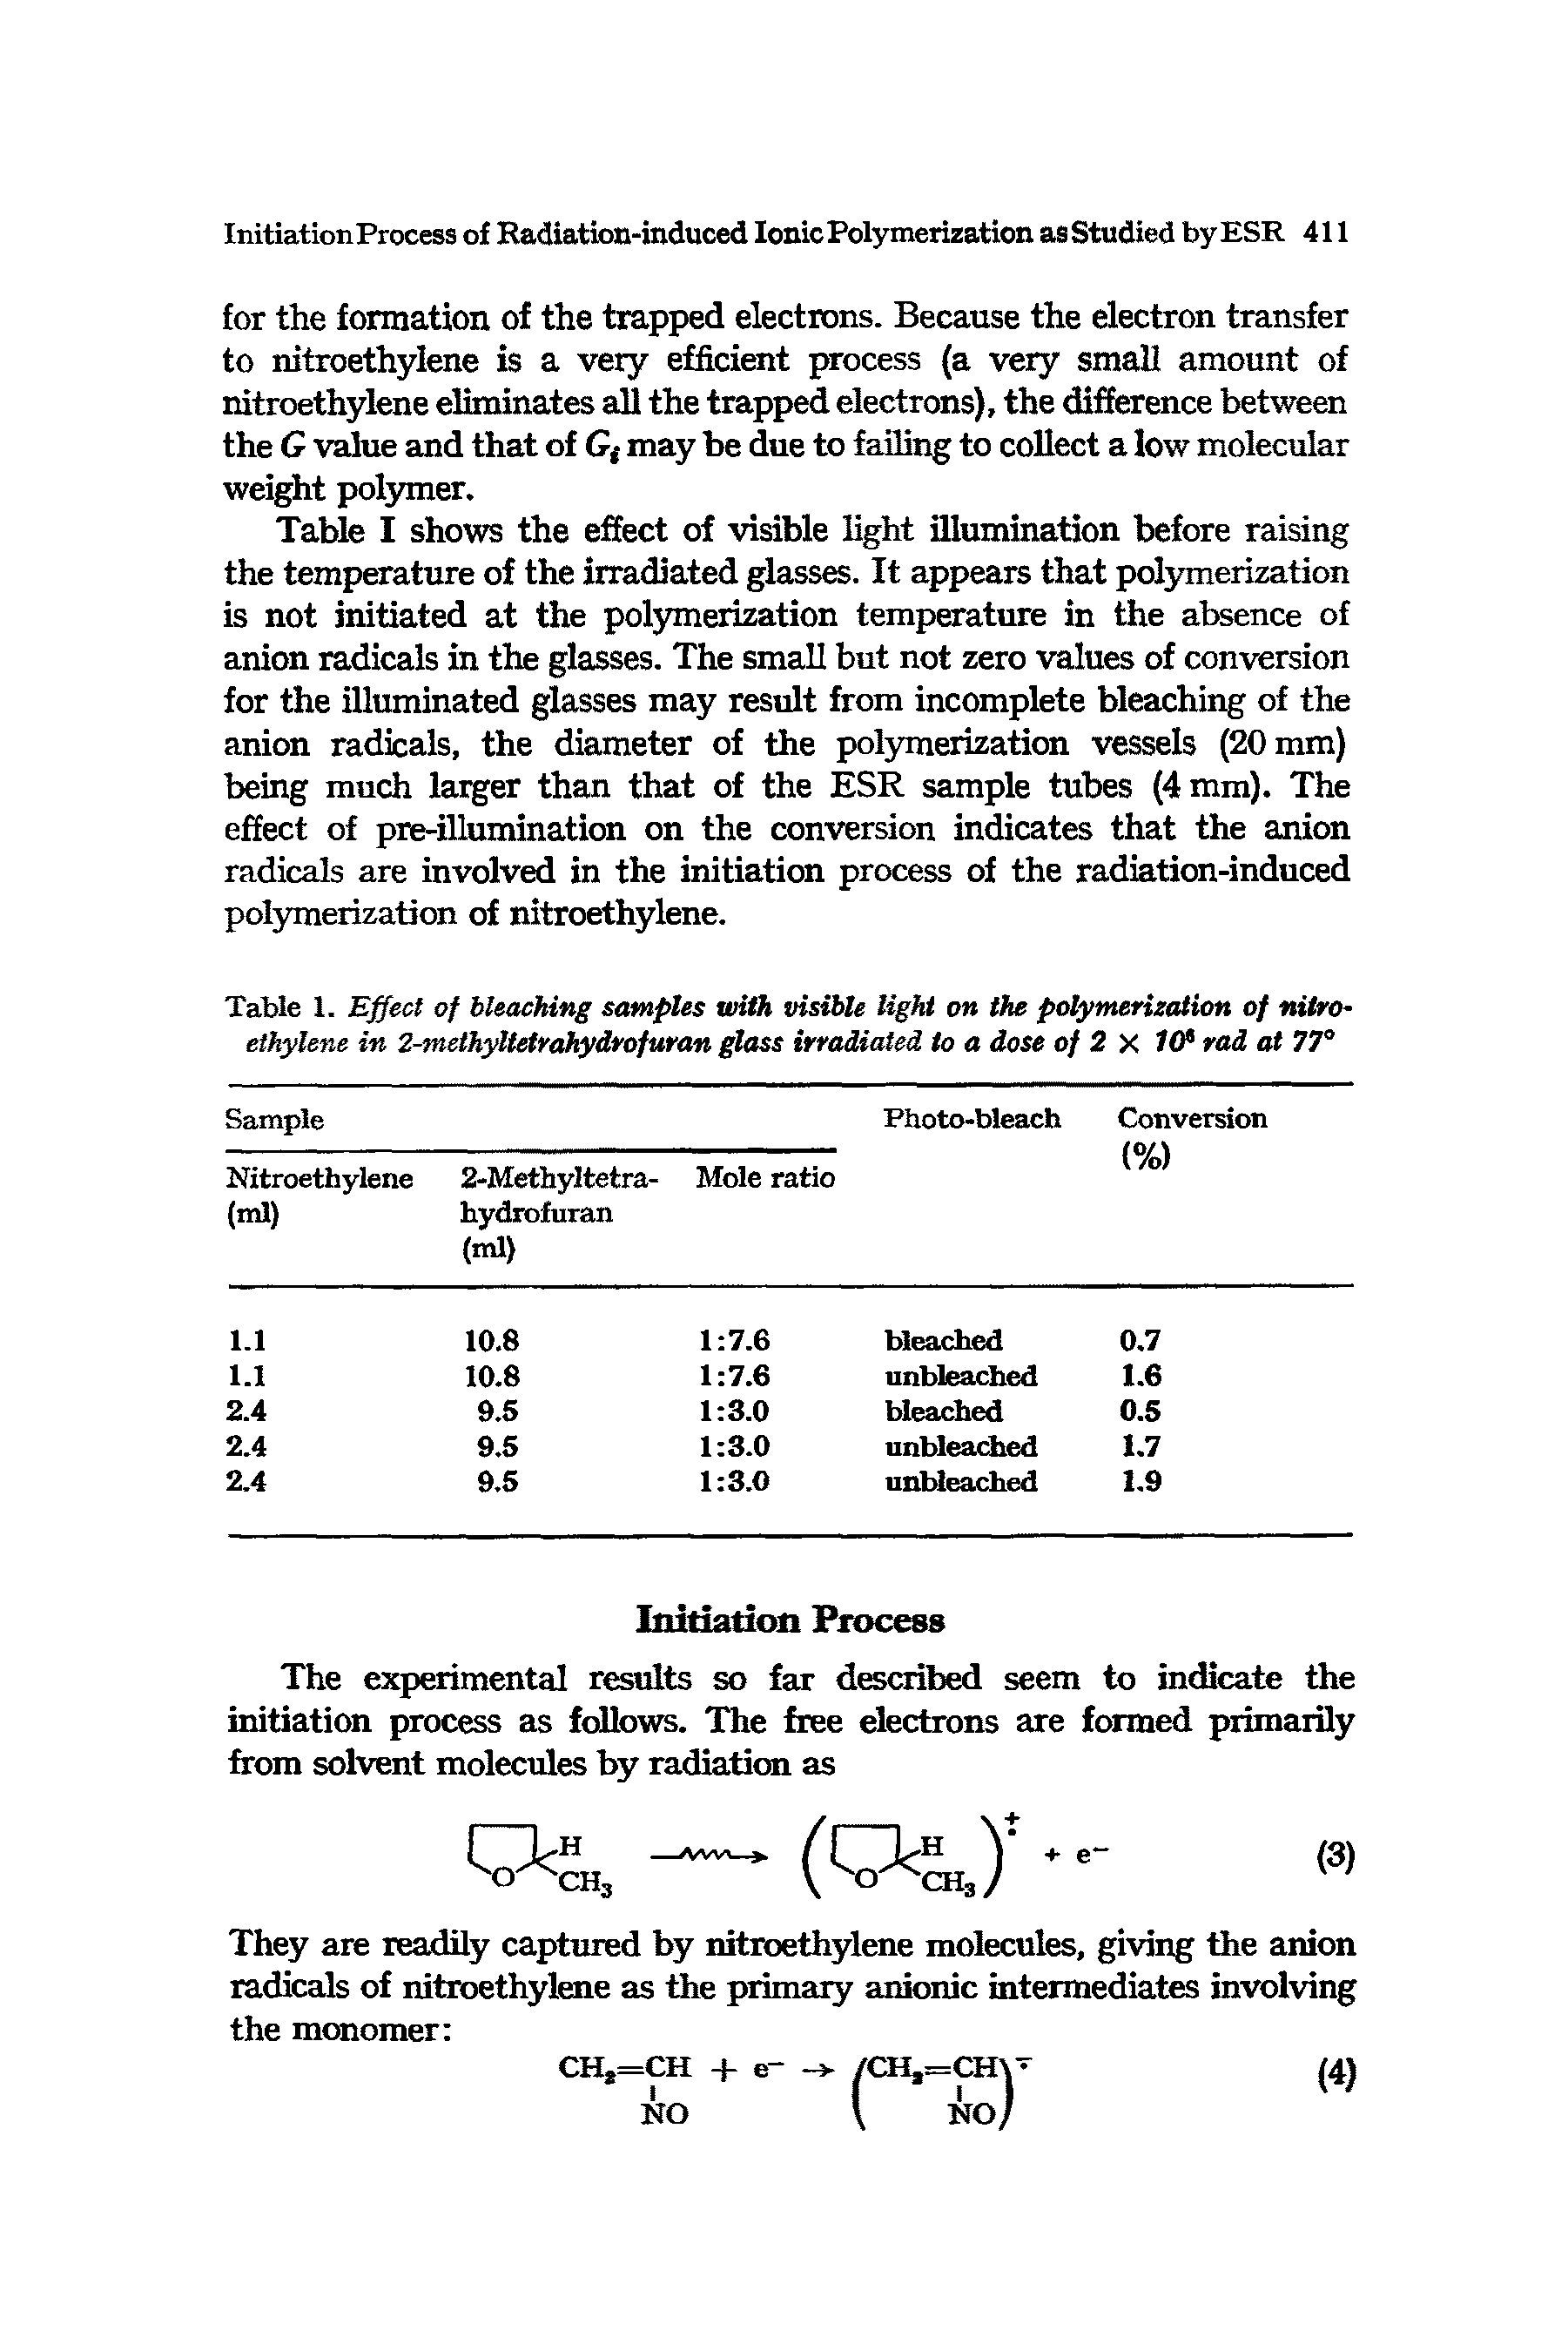 Table I shows the effect of visible light illumination before raising the temperature of the irradiated glasses. It appears that polymerization is not initiated at the polymerization temperature in the absence of anion radicals in the glasses. The small but not zero values of conversion for the illuminated glasses may result from incomplete bleaching of the anion radicals, the diameter of the polymerization vessels (20 mm) being much larger than that of the ESR sample tubes (4 mm). The effect of pre-illumination on the conversion indicates that the anion radicals are involved in the initiation process of the radiation-induced polymerization of nitroethylene.